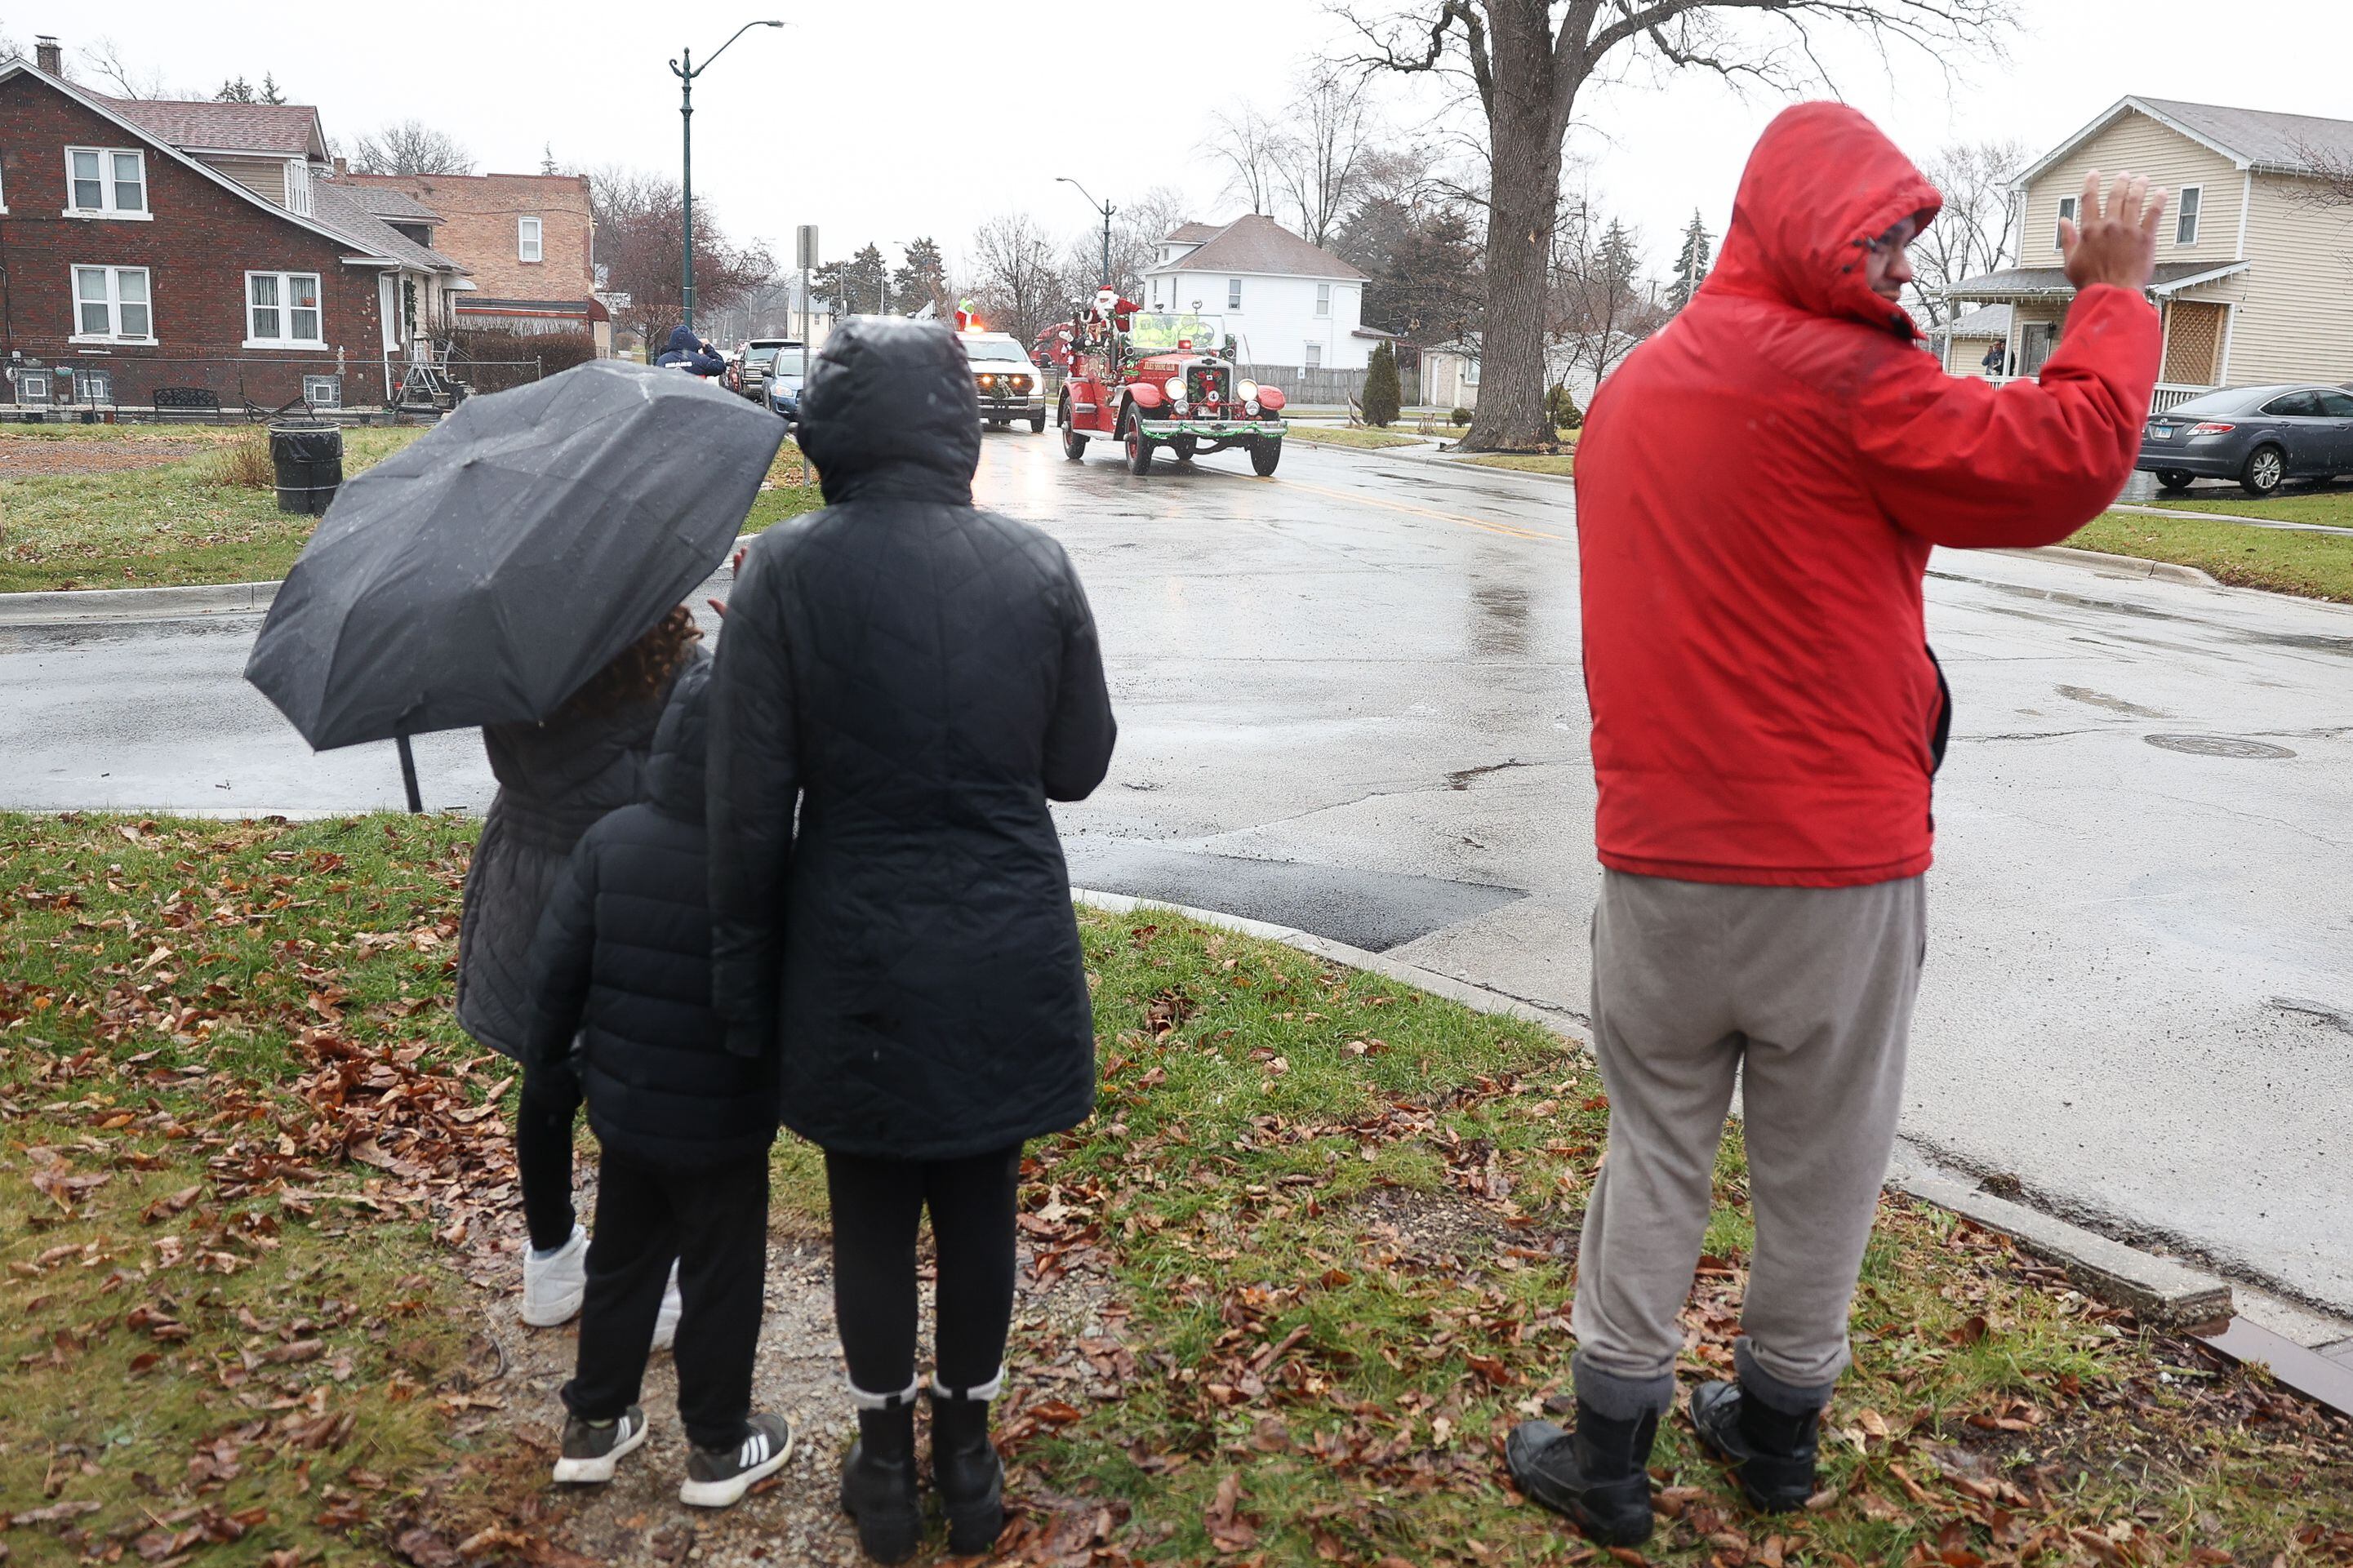 A family braves the rain to see Santa as he passes through Joliet on his way to the North Pole to get ready for Christmas Eve on Saturday, Dec.16th in Joliet.